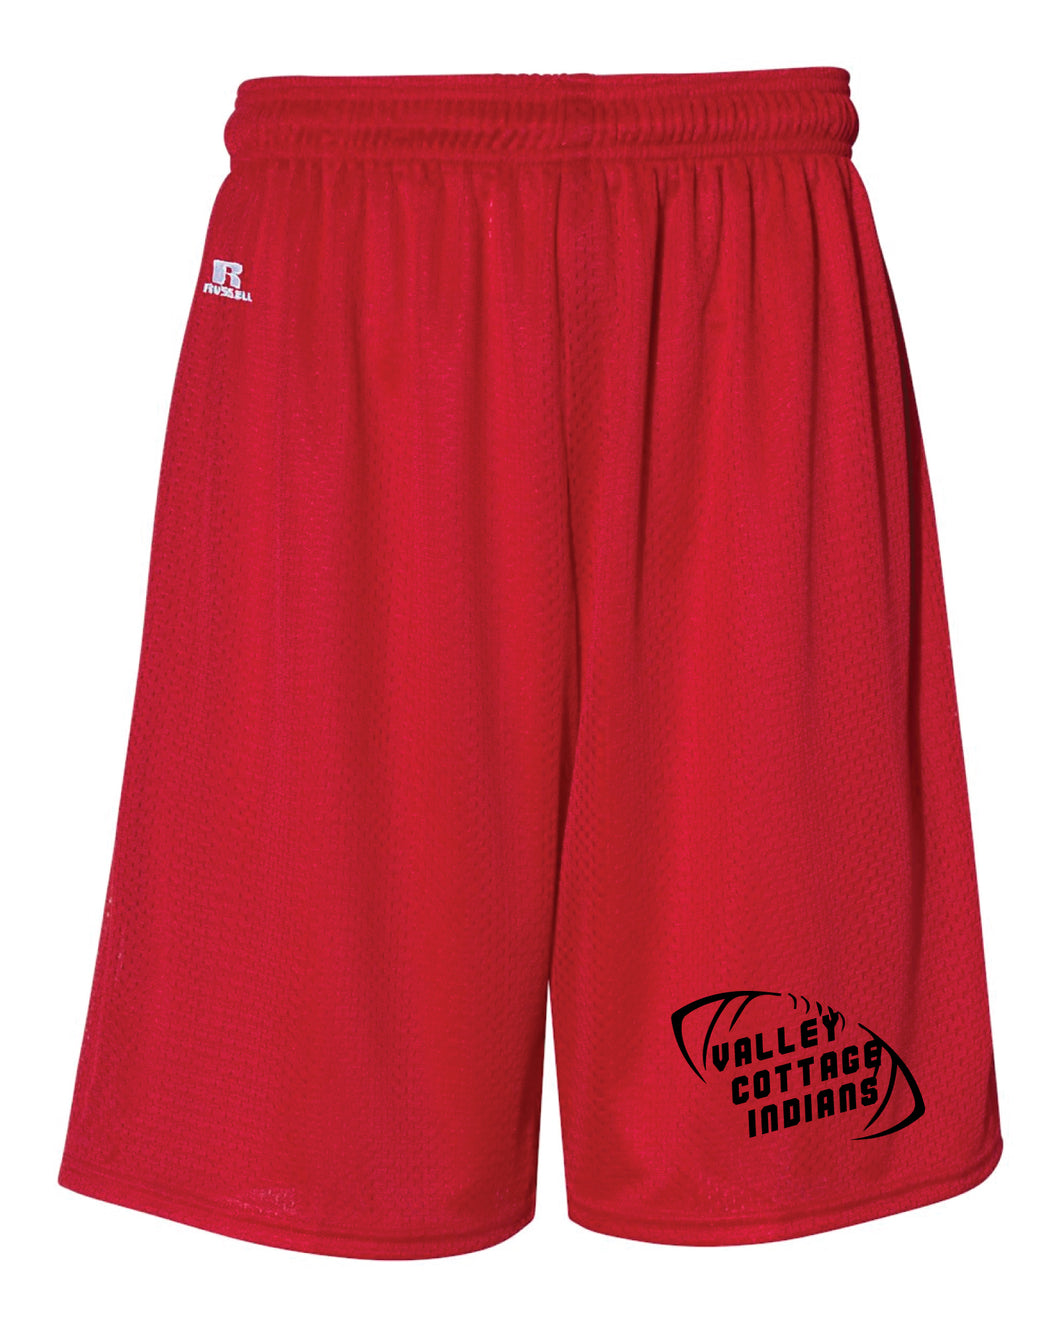 VCI Youth Football Red Russell Athletic Tech Shorts - Red - 5KounT2018